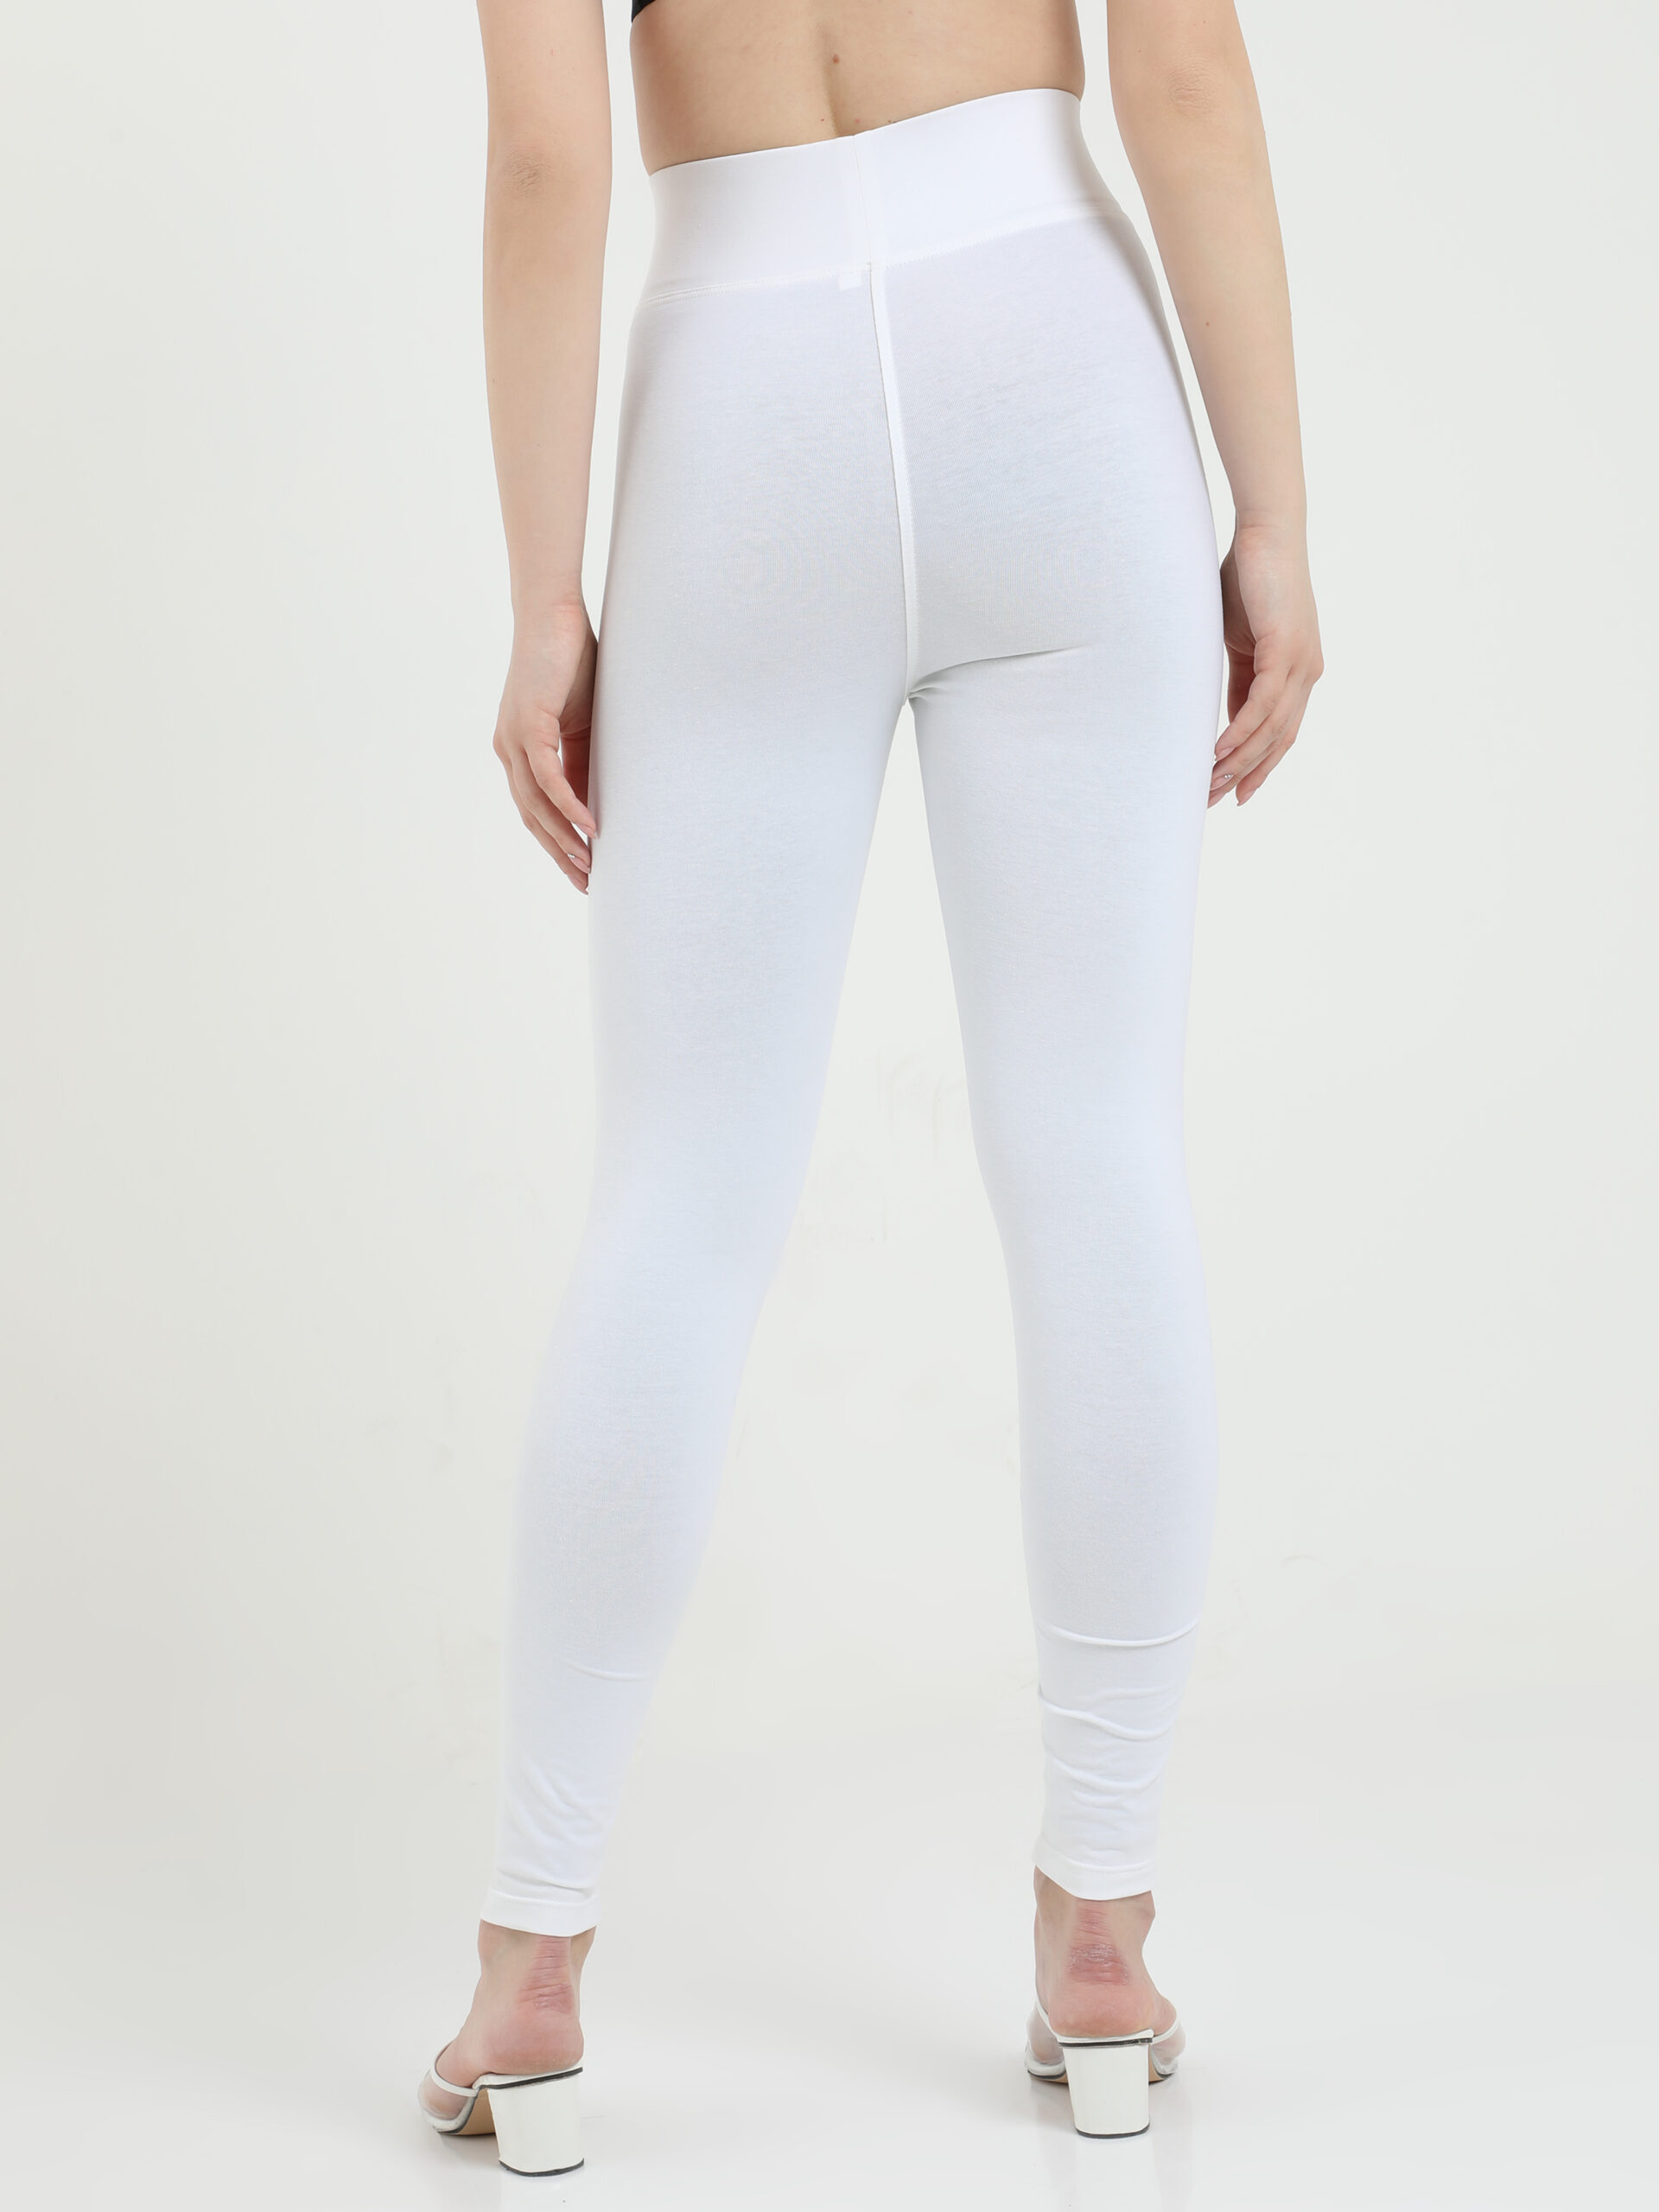 Premium Photo  Isolated of Shapewear Leggings High Waisted Shaping Leggings  Compression White Blank Clean Fashion